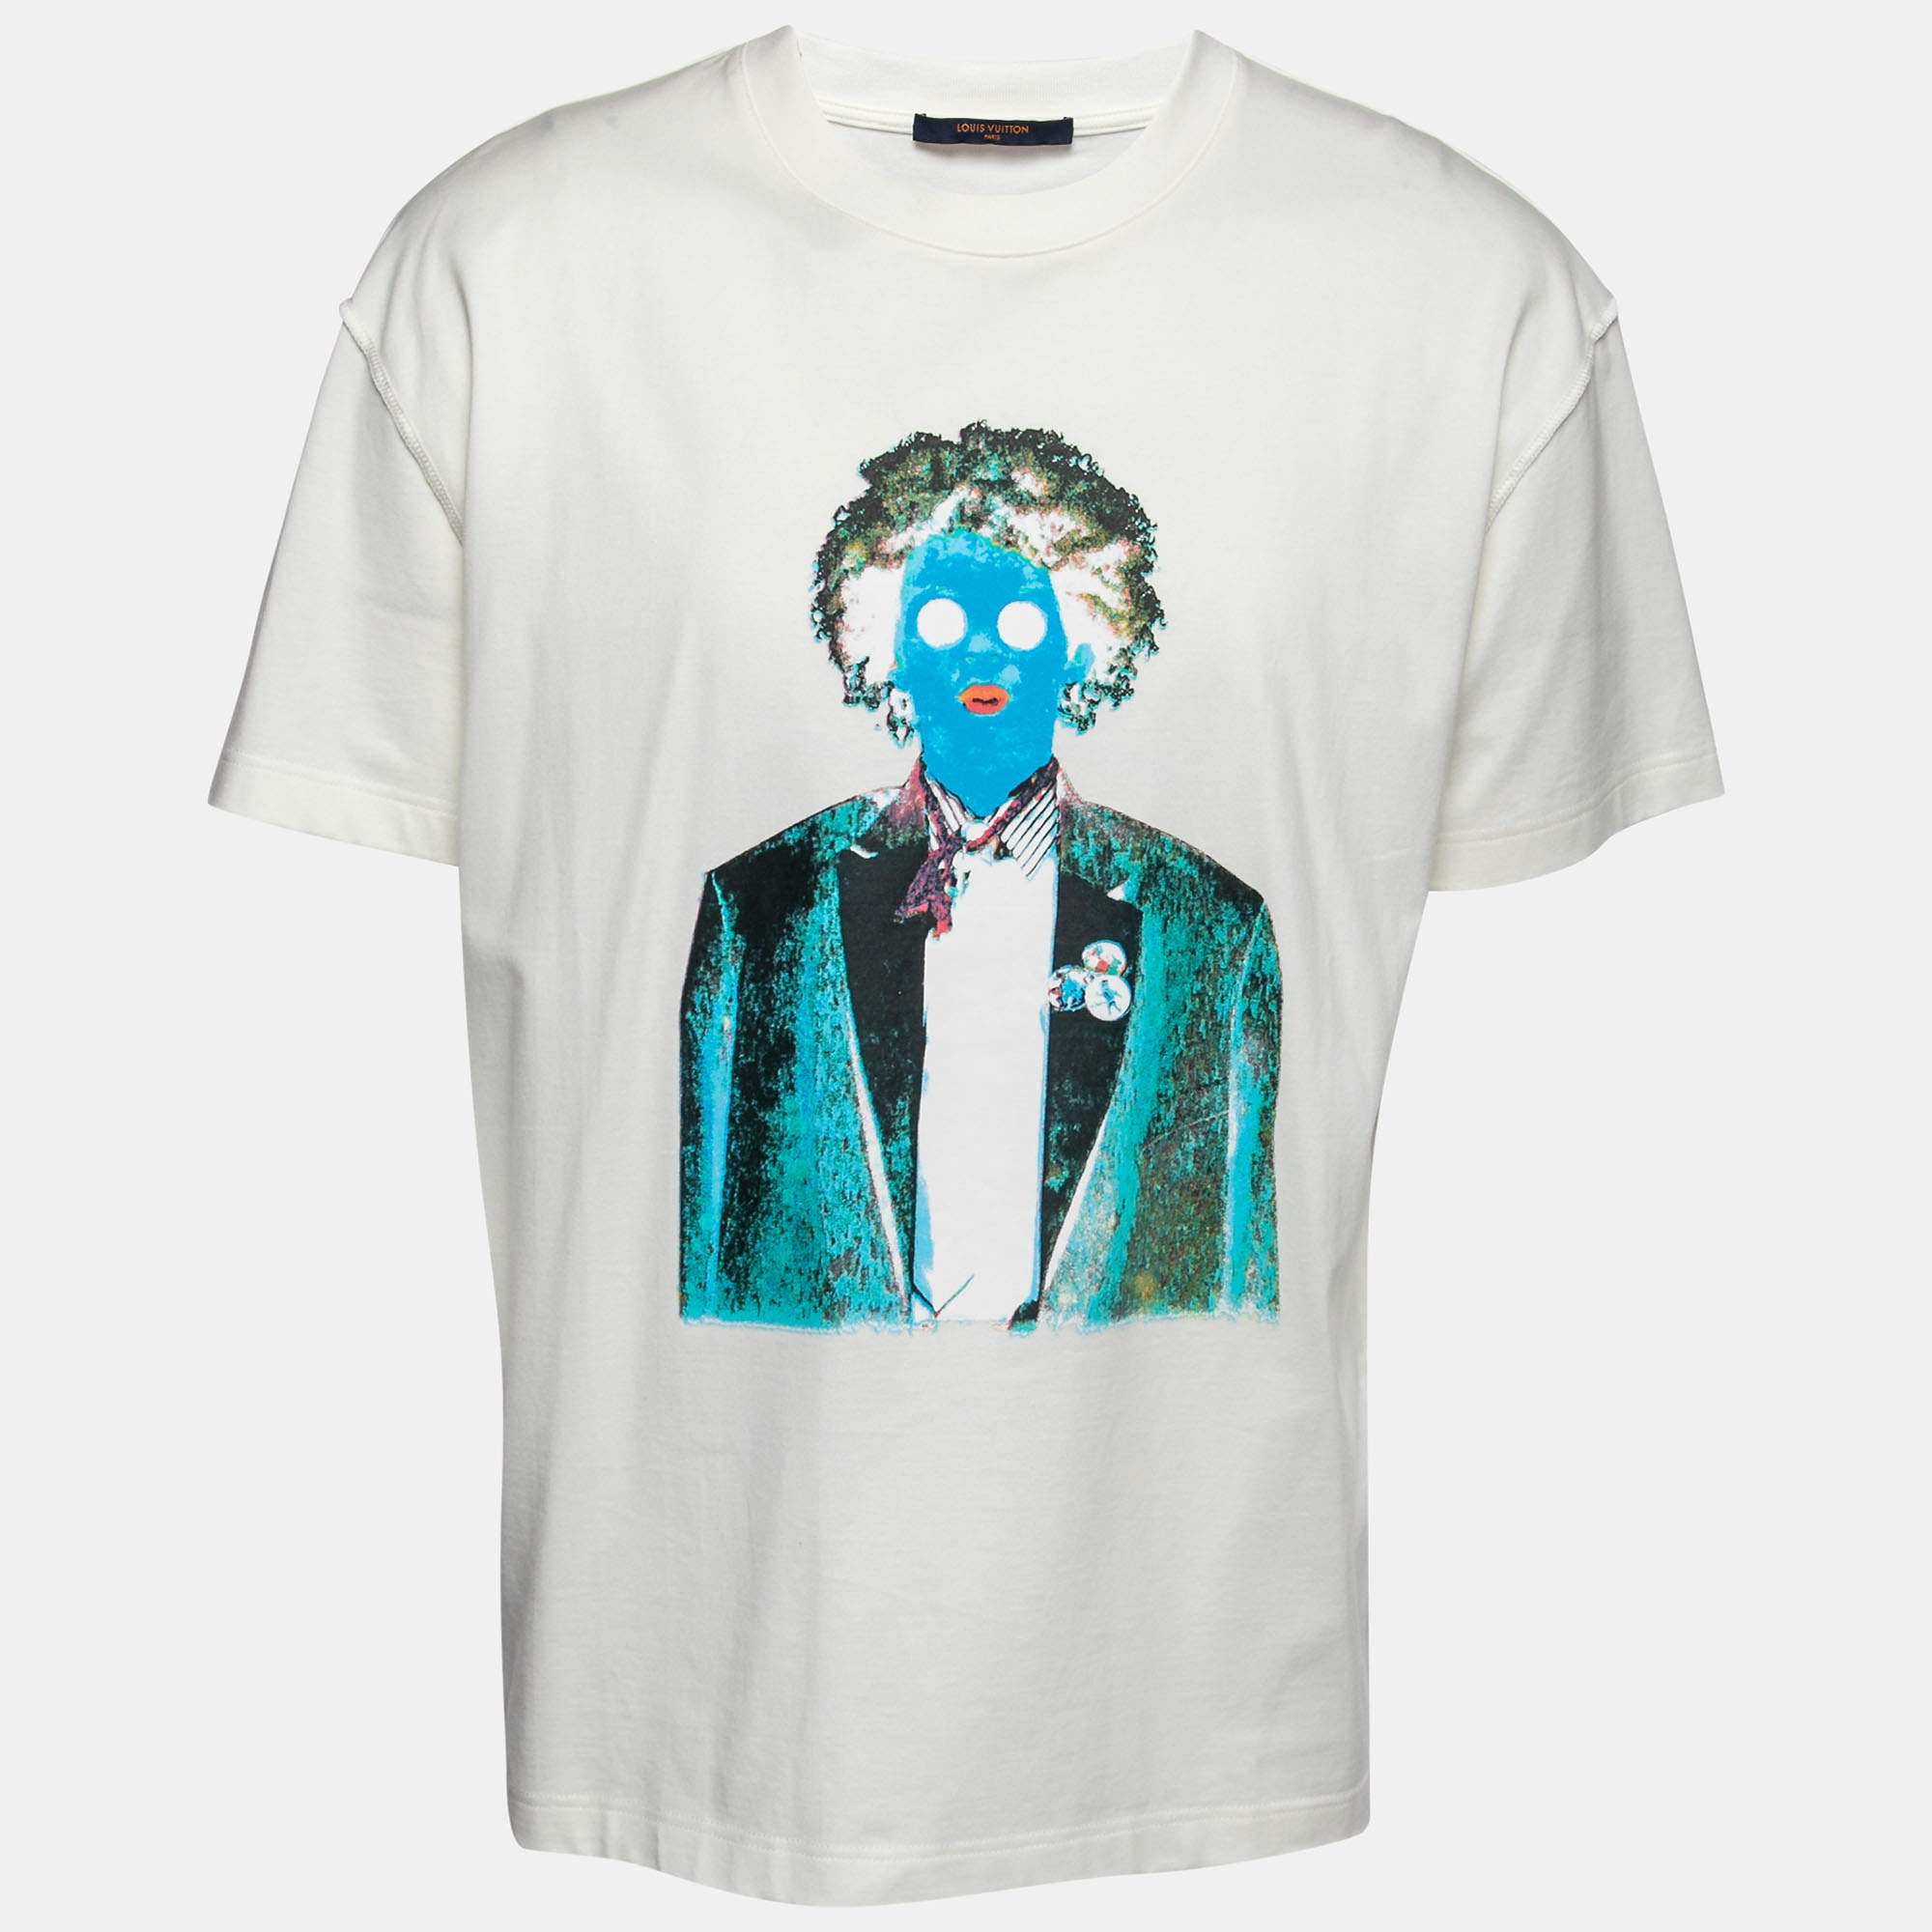 lv shirt - T-Shirts Prices and Deals - Men's Wear Nov 2023